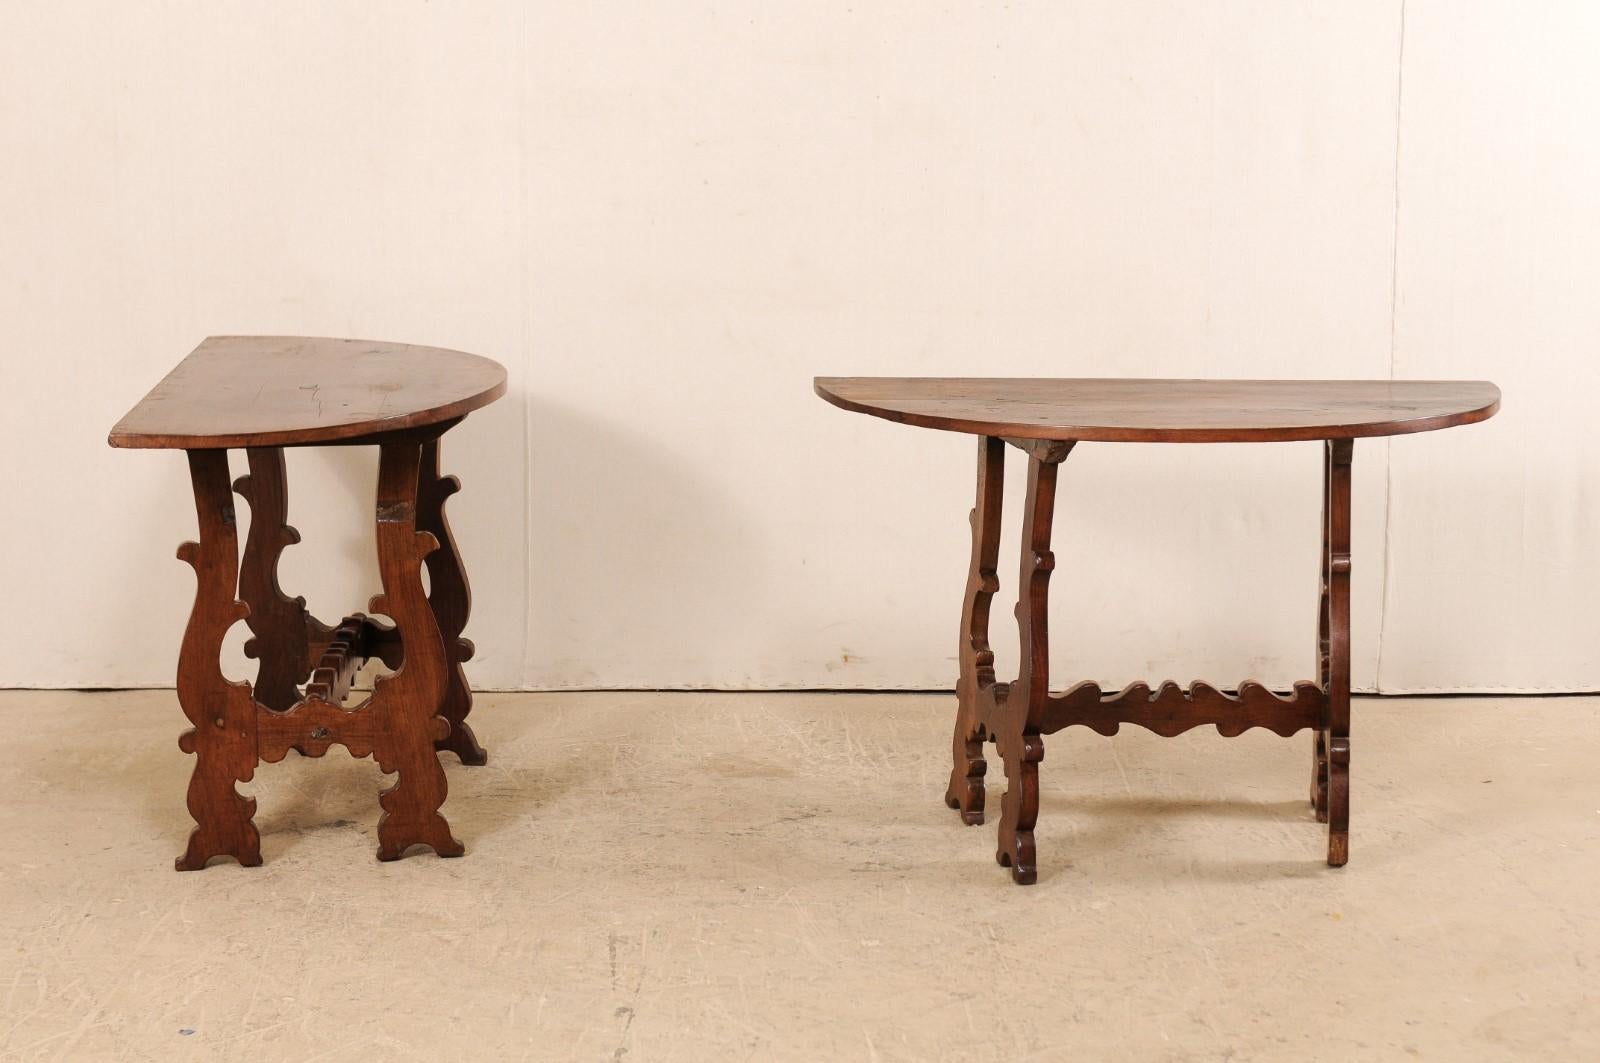 19th Century Italian Pair of Shapely-Carved Lyre-Leg Demi-Lune Walnut Console Tables, 19th C.